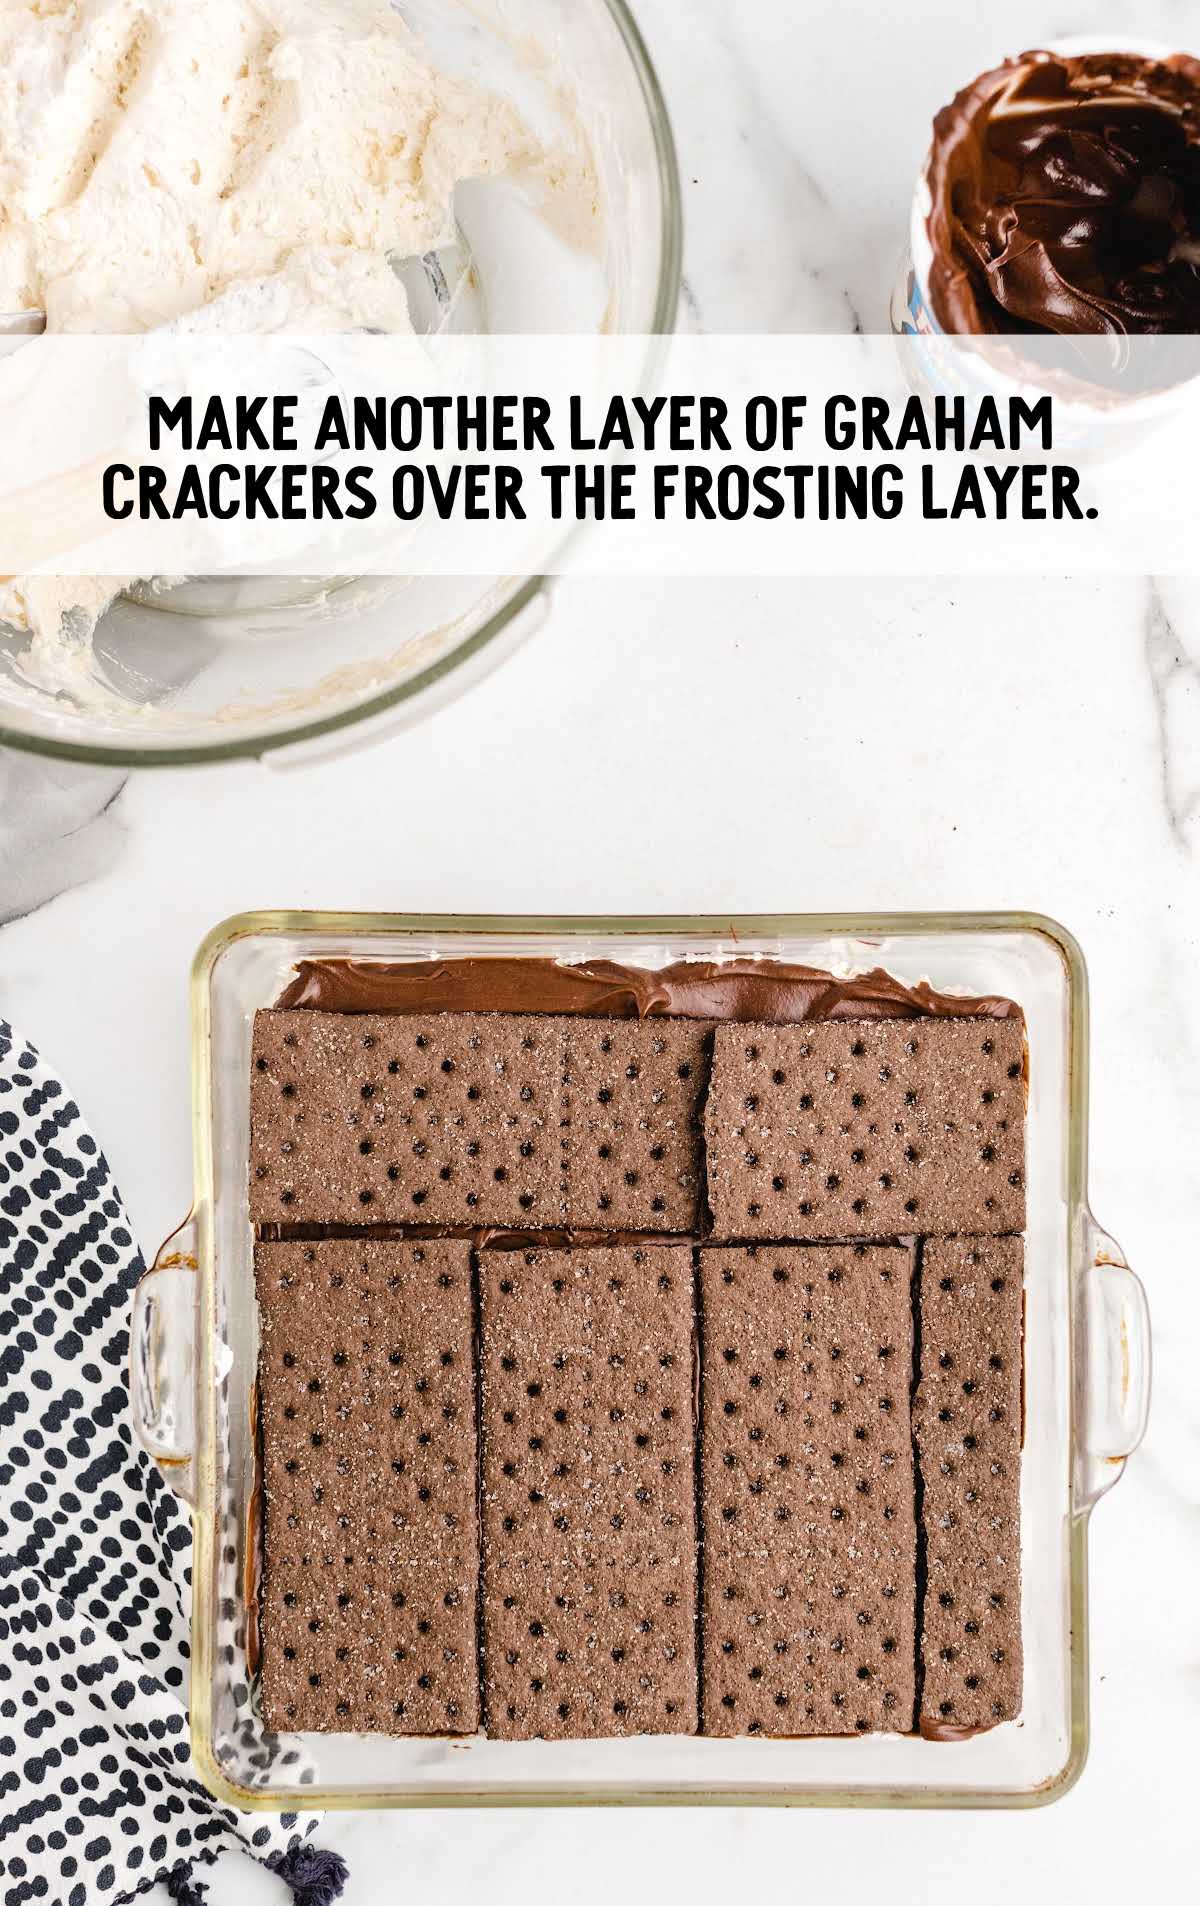 graham crackers layered on top of the frosting layer in the baking dish